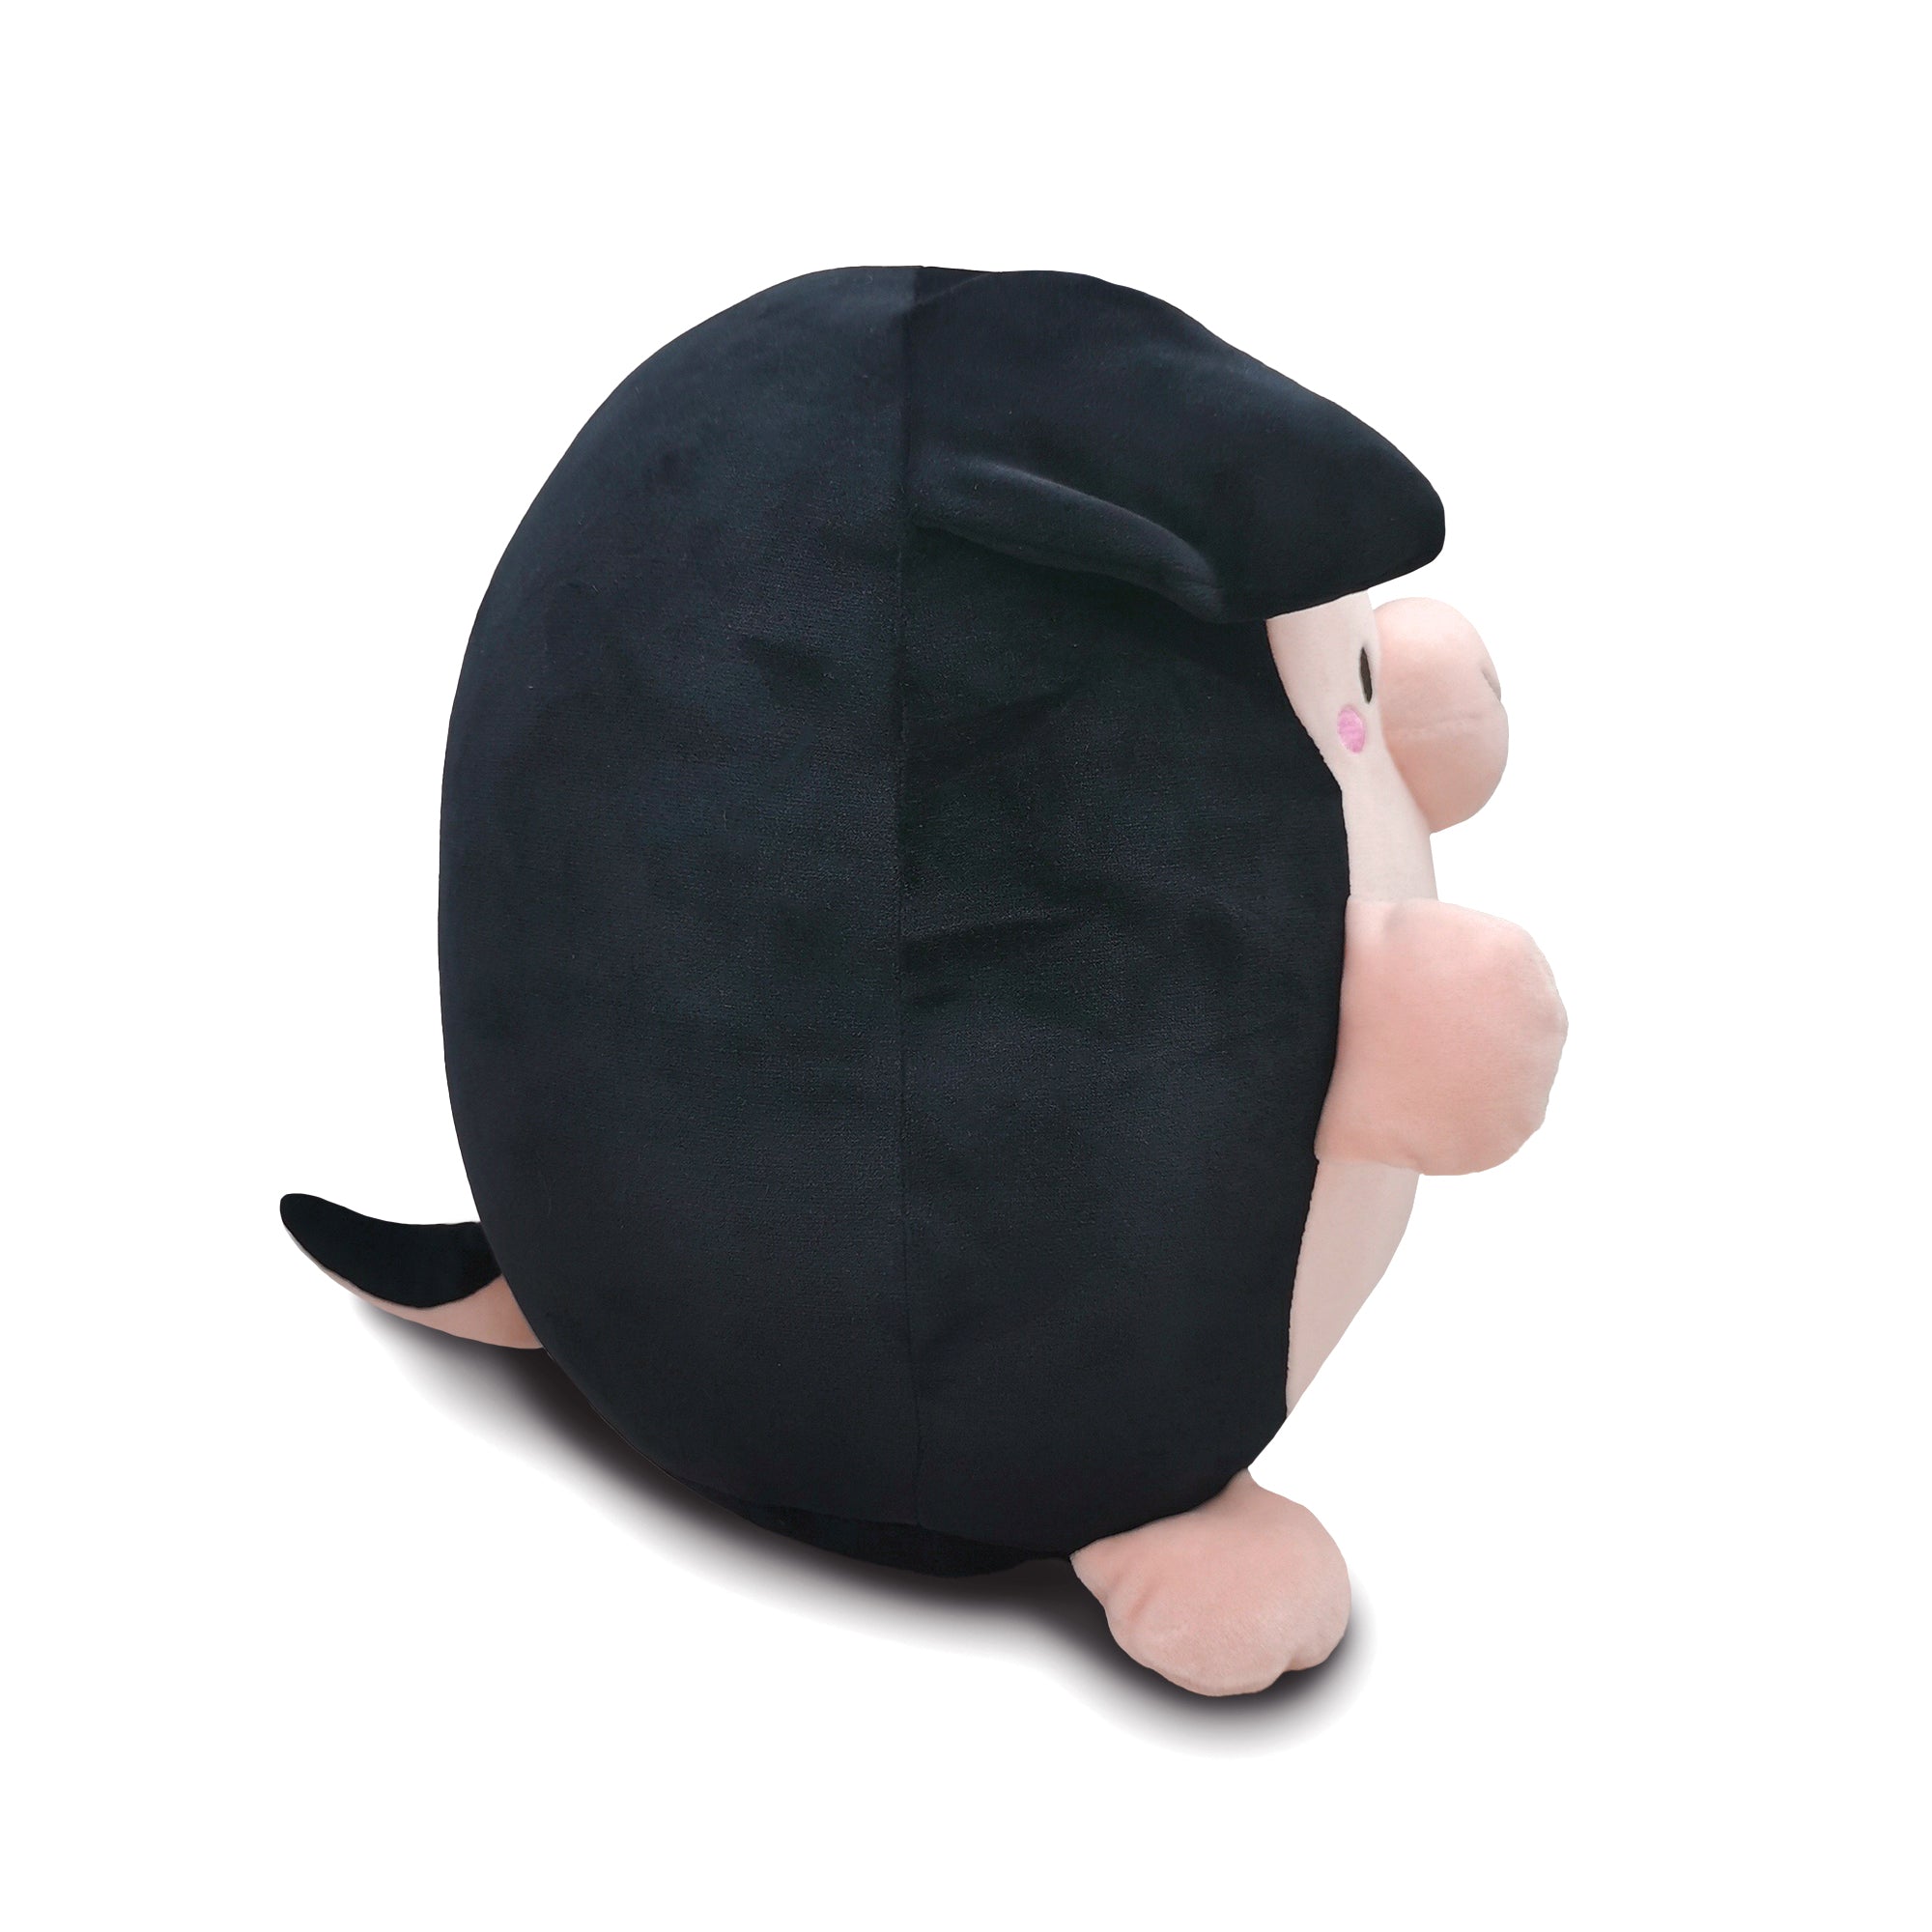 Z SIDE® | DEXTER PILLOW PLUSHIE (LIMITED EDITION)